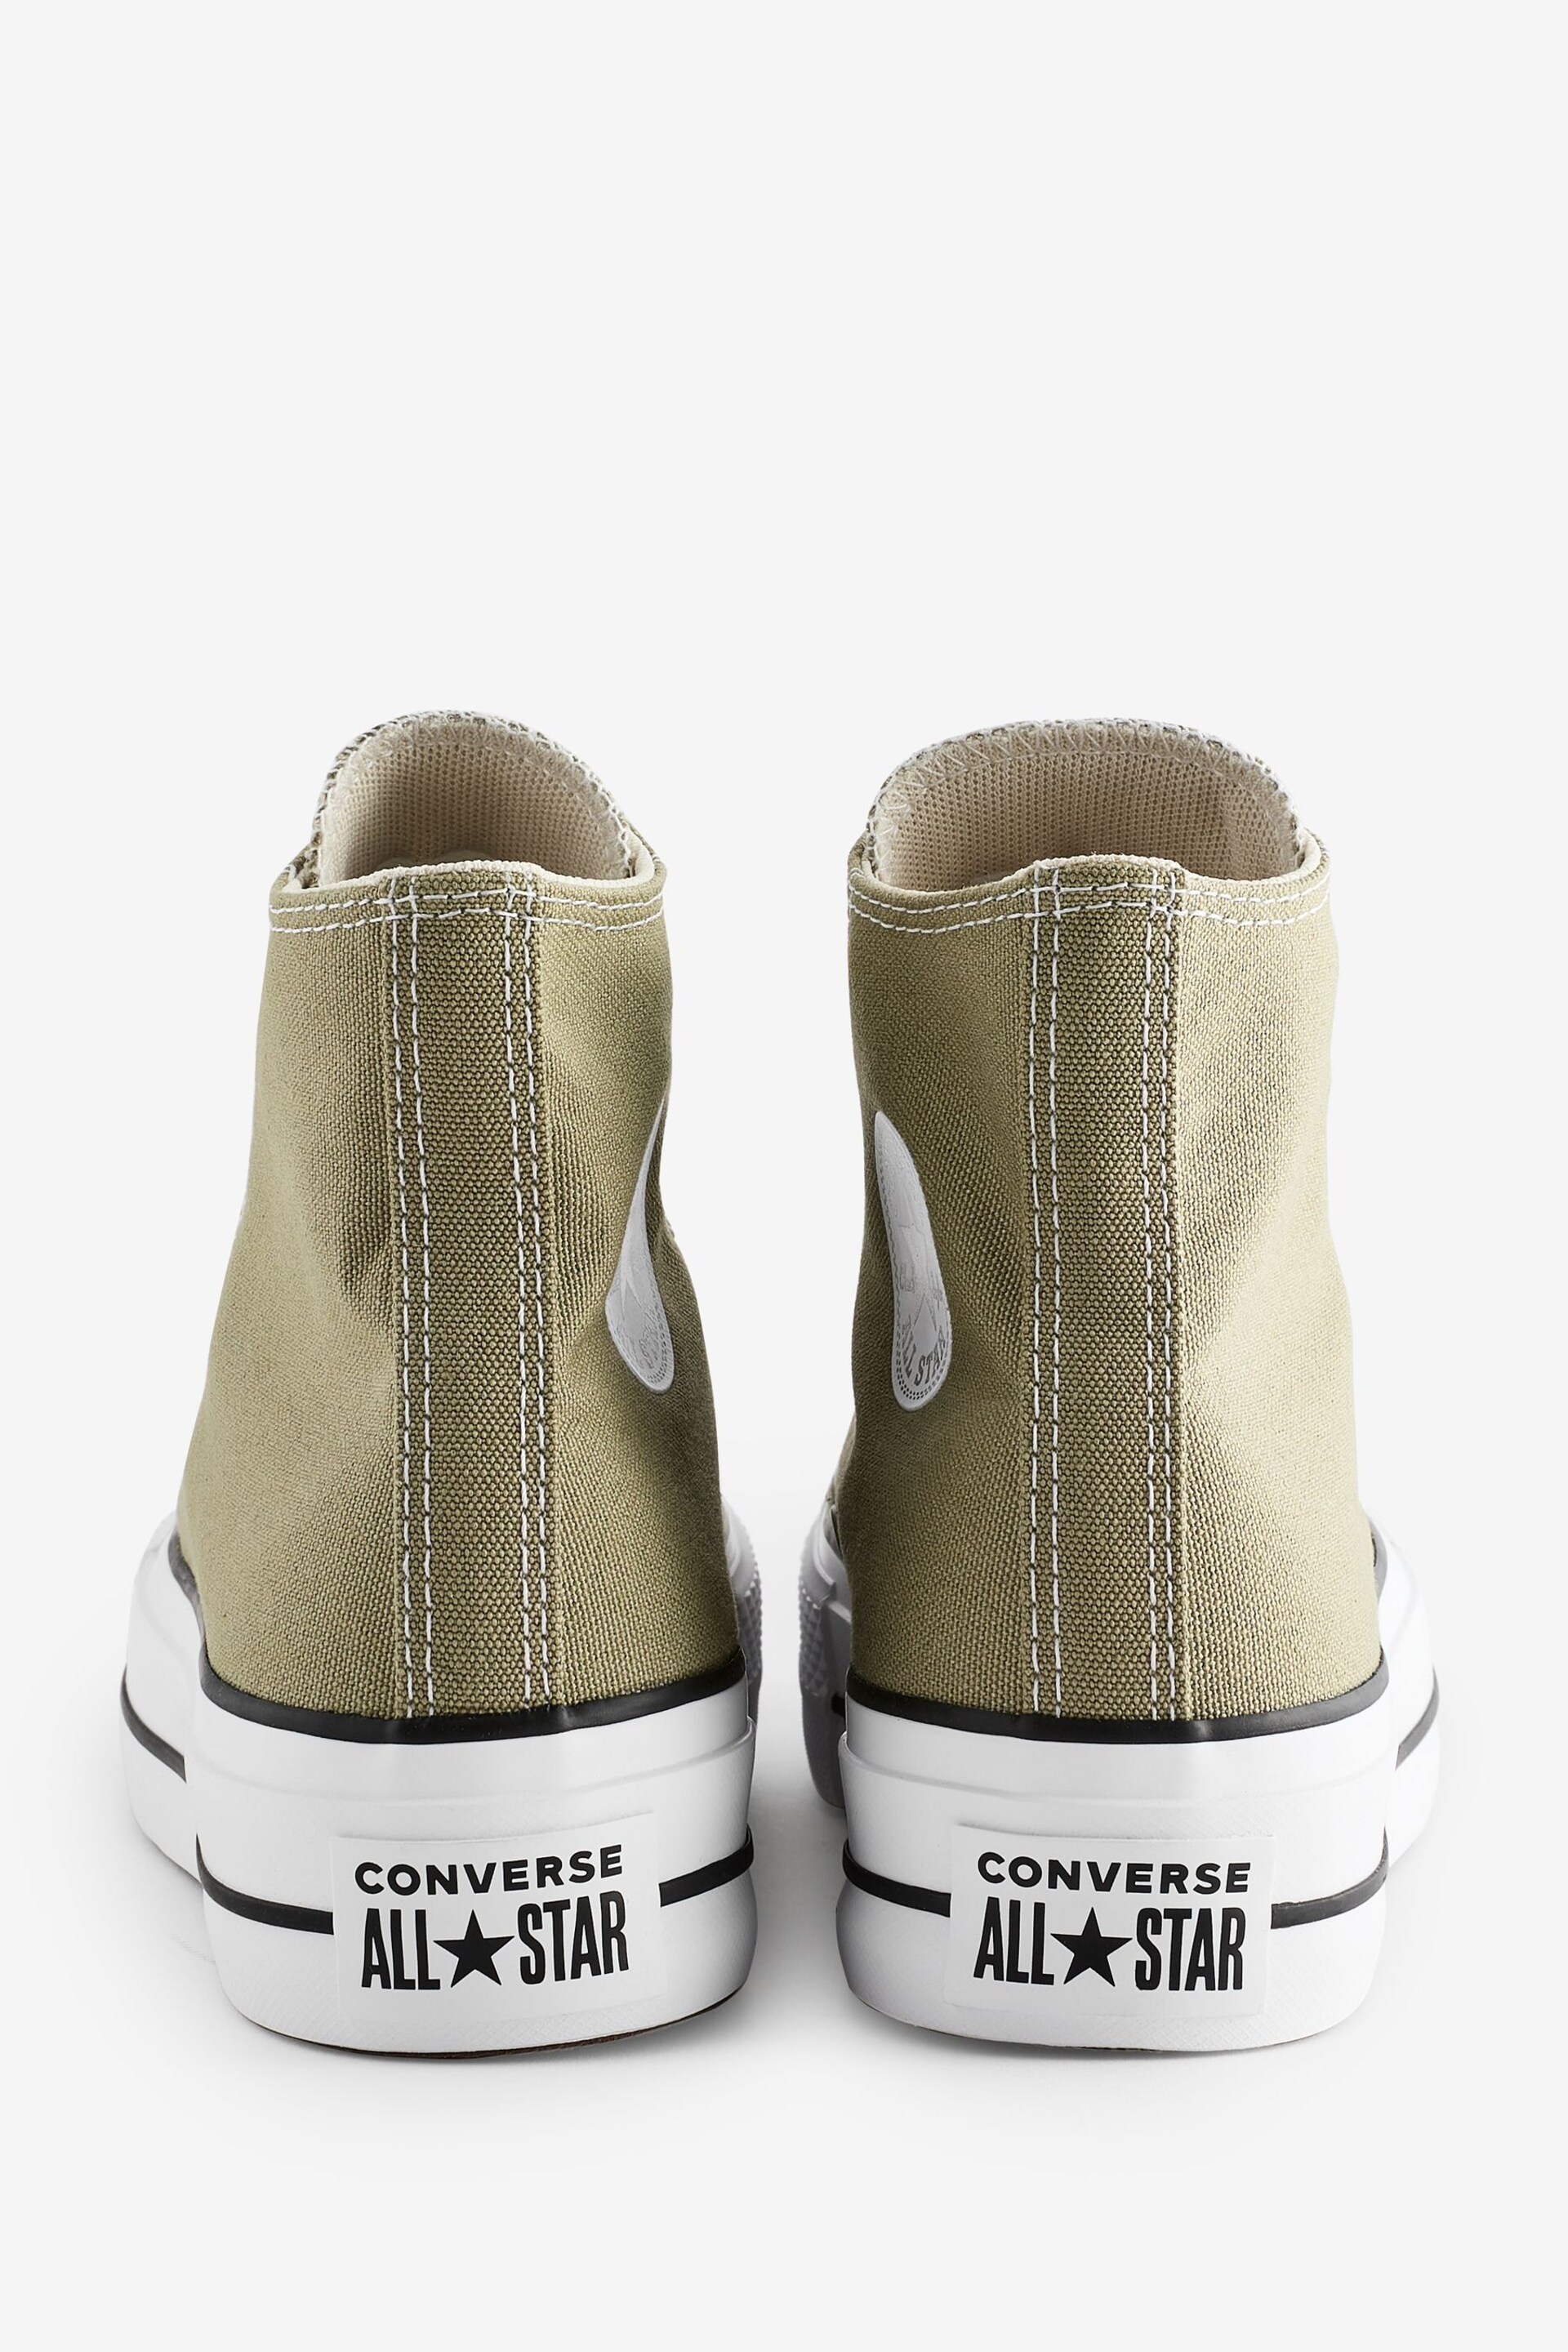 Converse Khaki Green Chuck Taylor All Star High Top Lift Trainers - Image 4 of 9